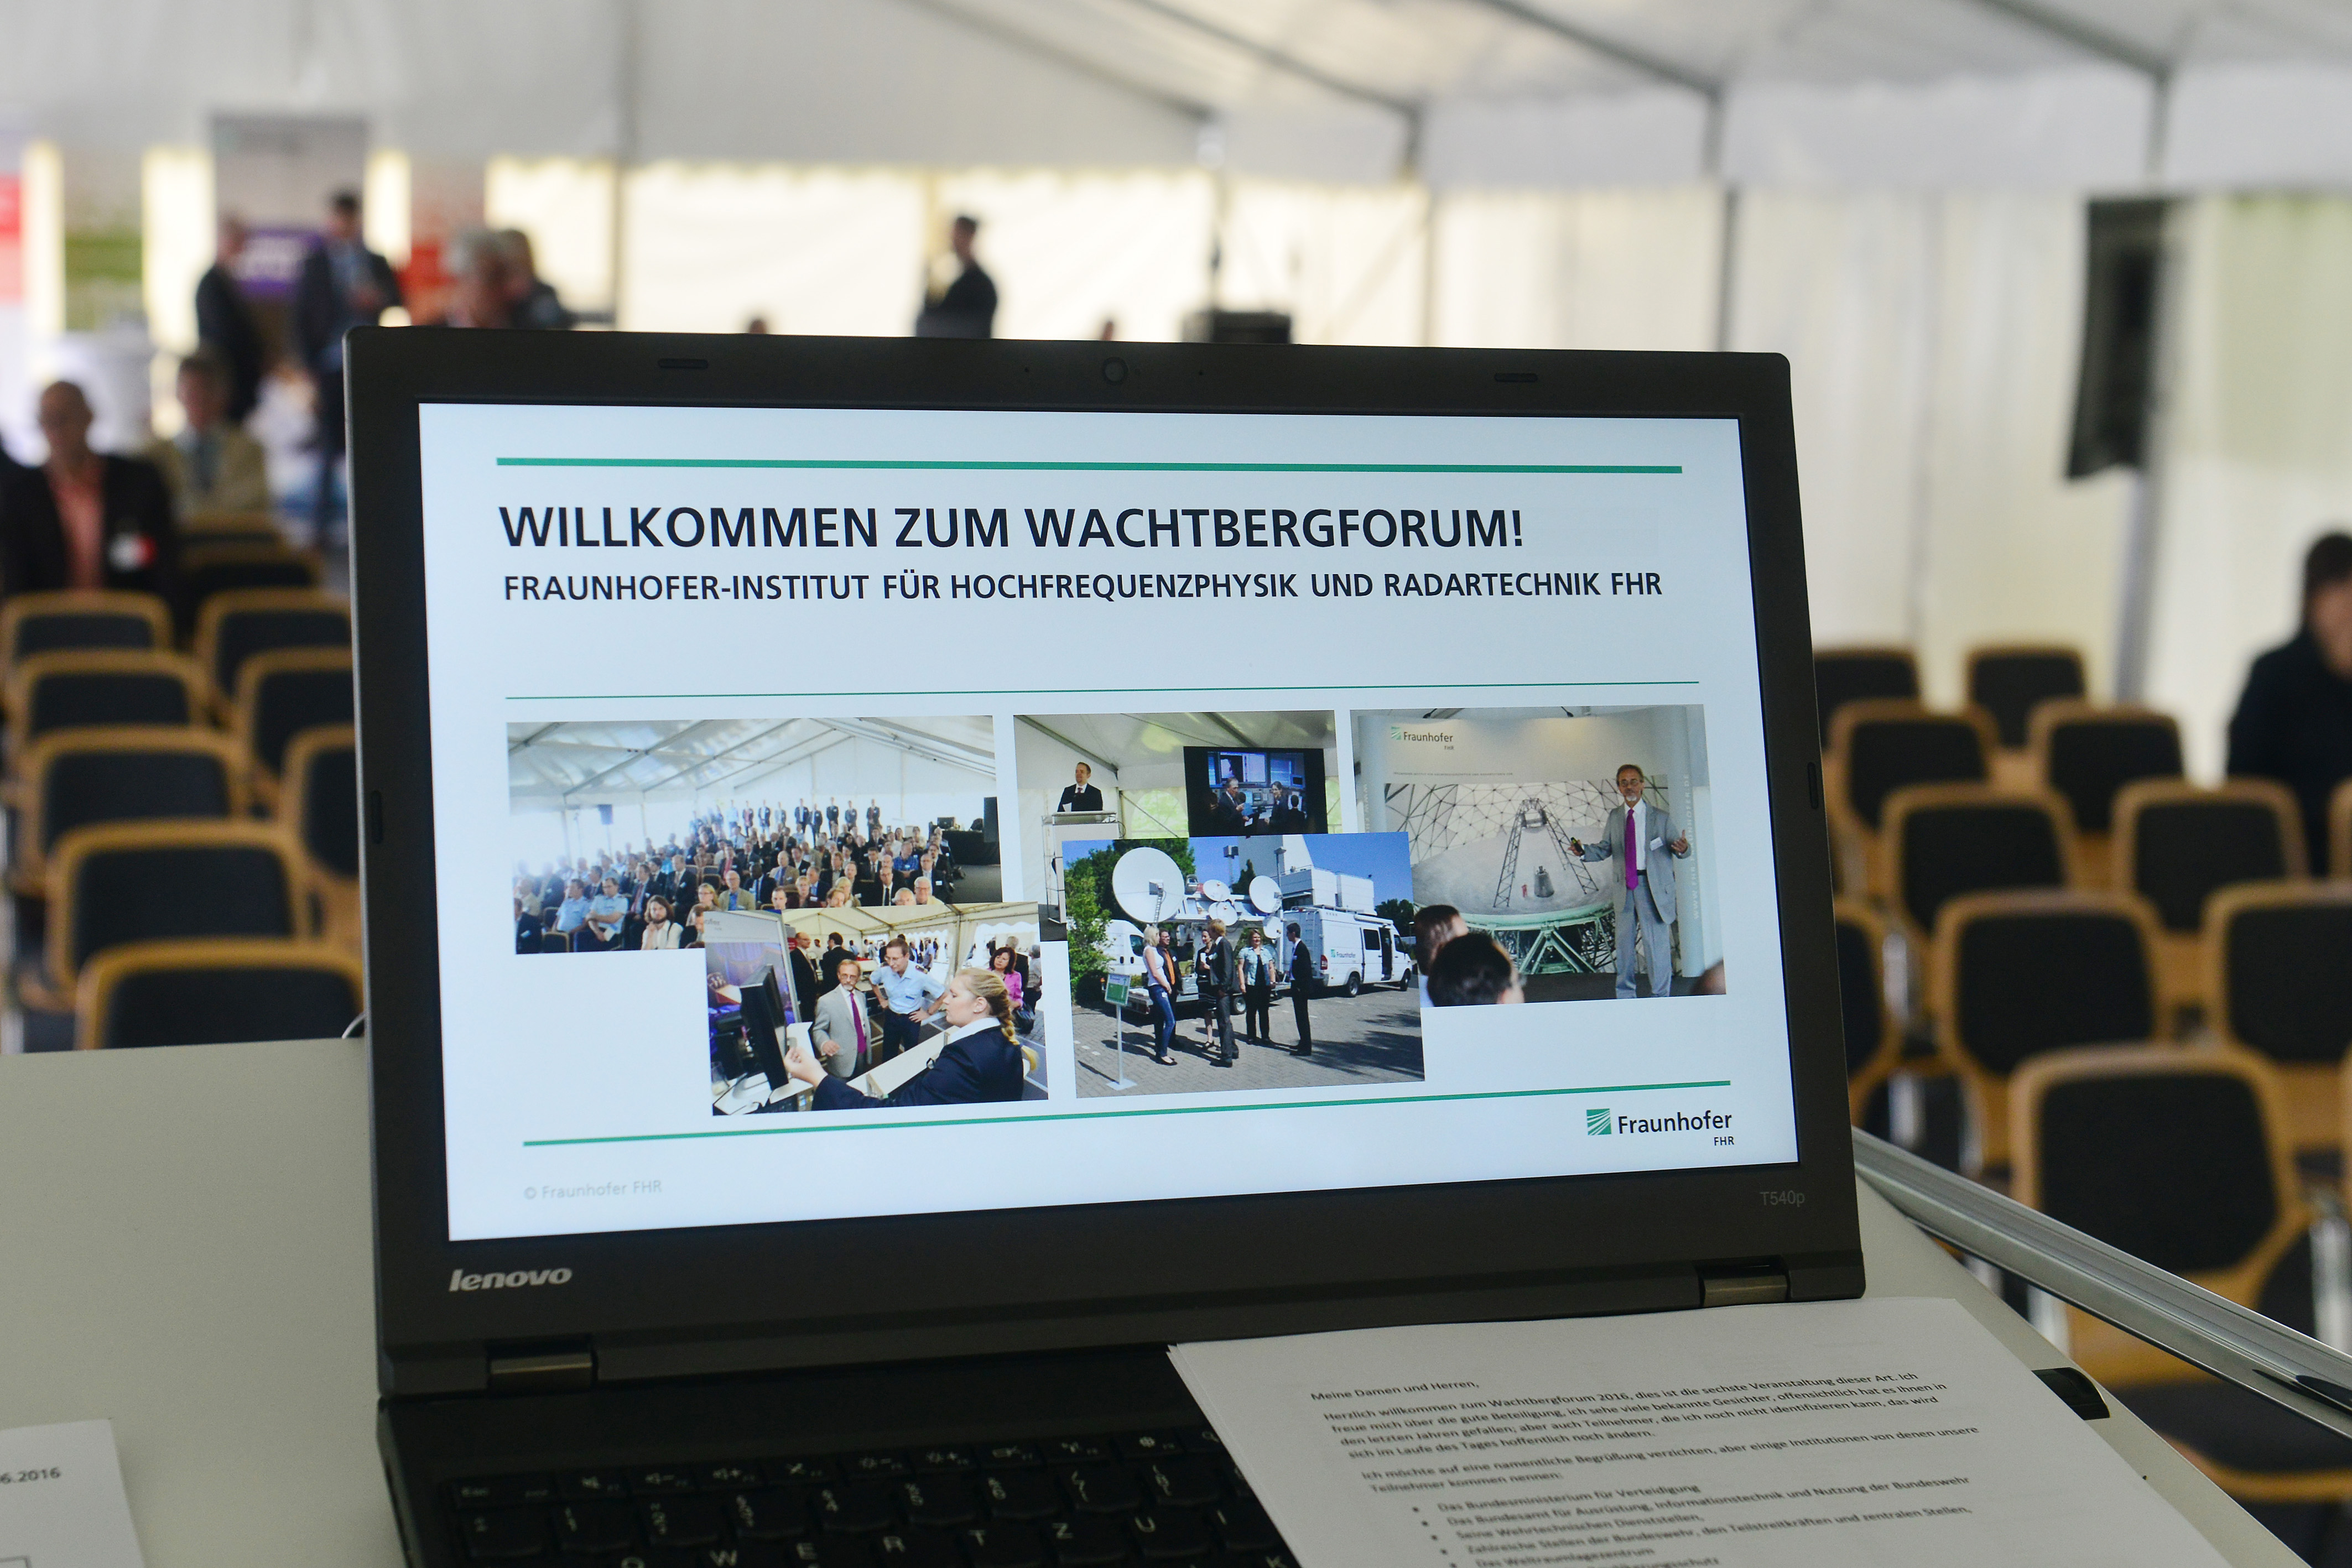 Visit us at this year's Wachtberg-Forum!